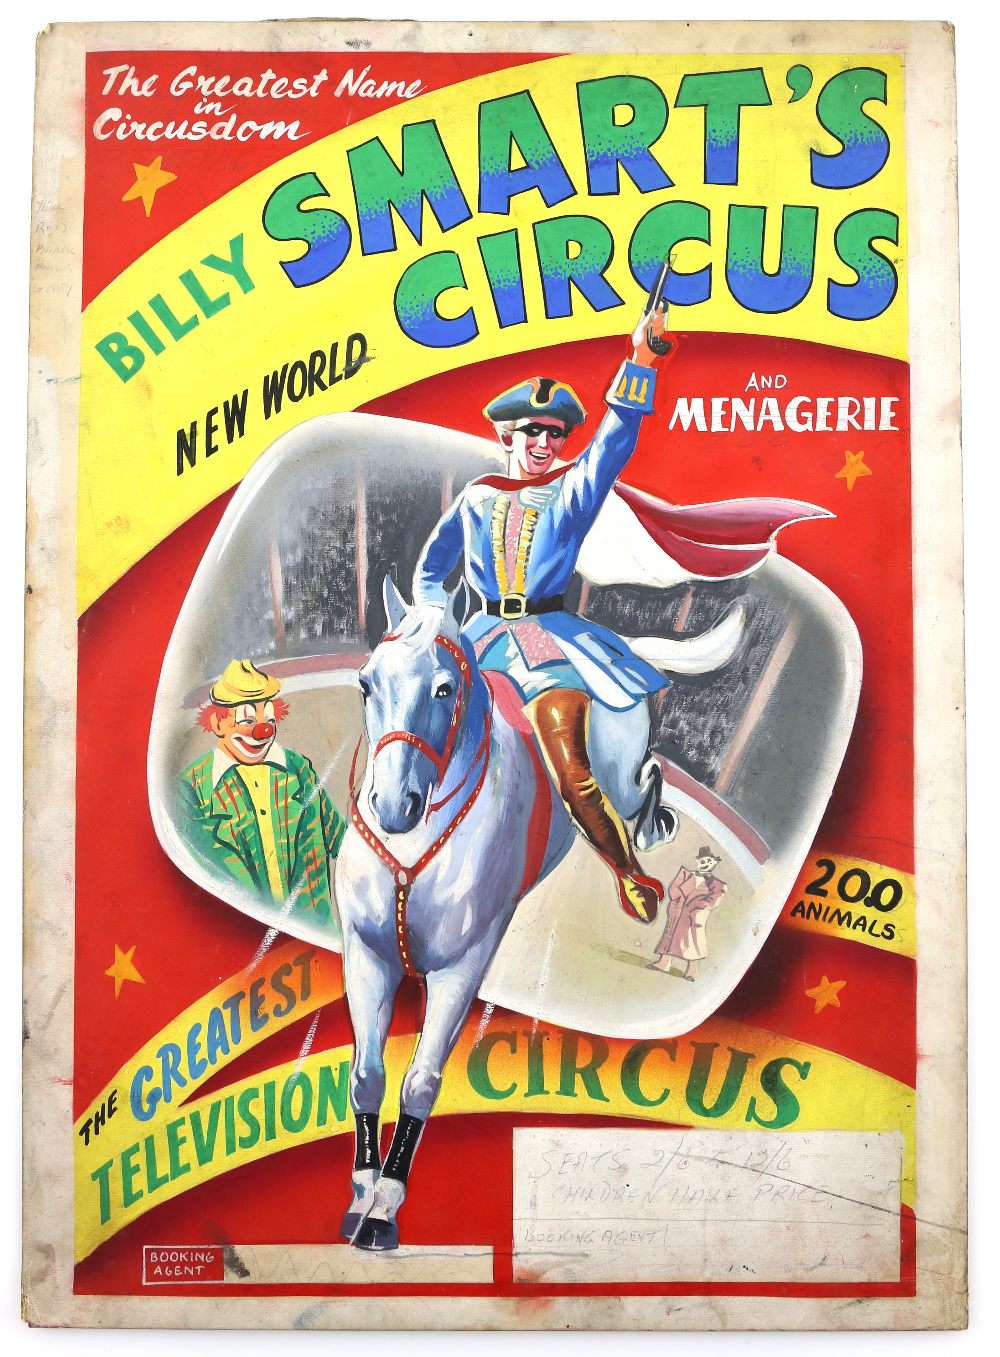 Billy Smart's Circus and Menagerie - 'The Greatest Television Circus', original hand painted